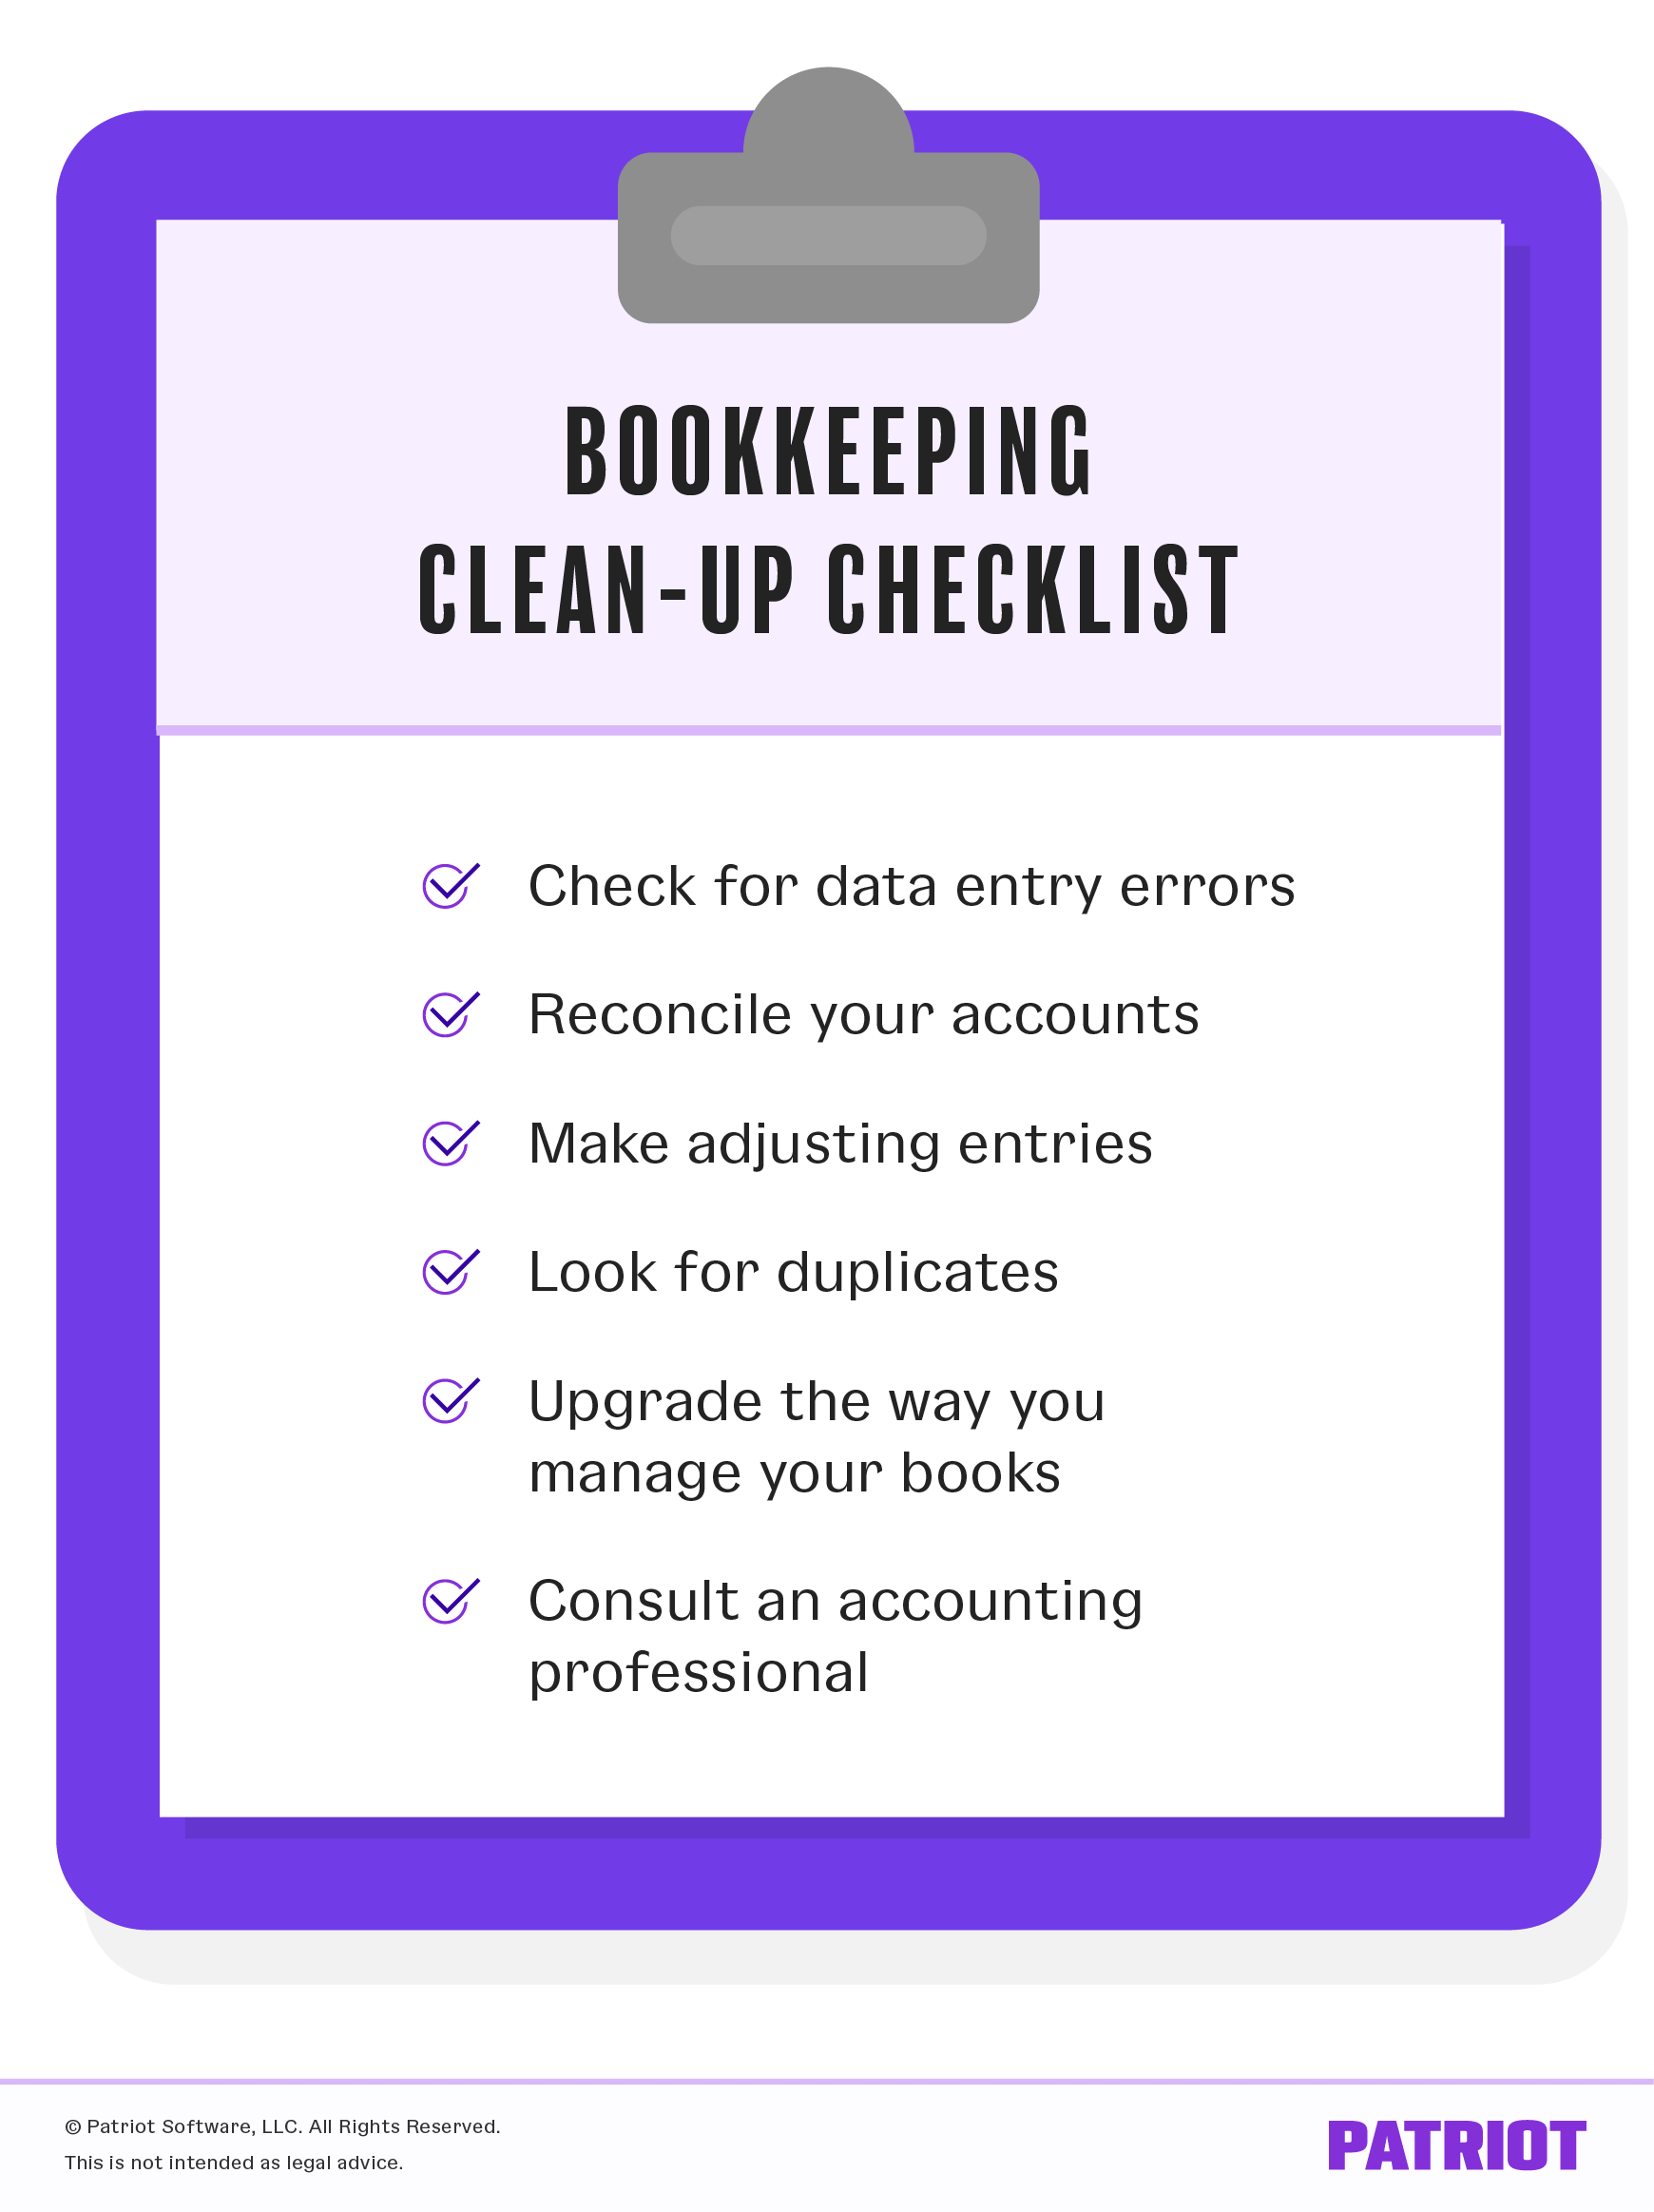 Bookkeeping clean-up checklist: Check for data entry errors, reconcile your accounts, make adjusting entries, look for duplicates, upgrade the way you manage your books, consult an accounting professional